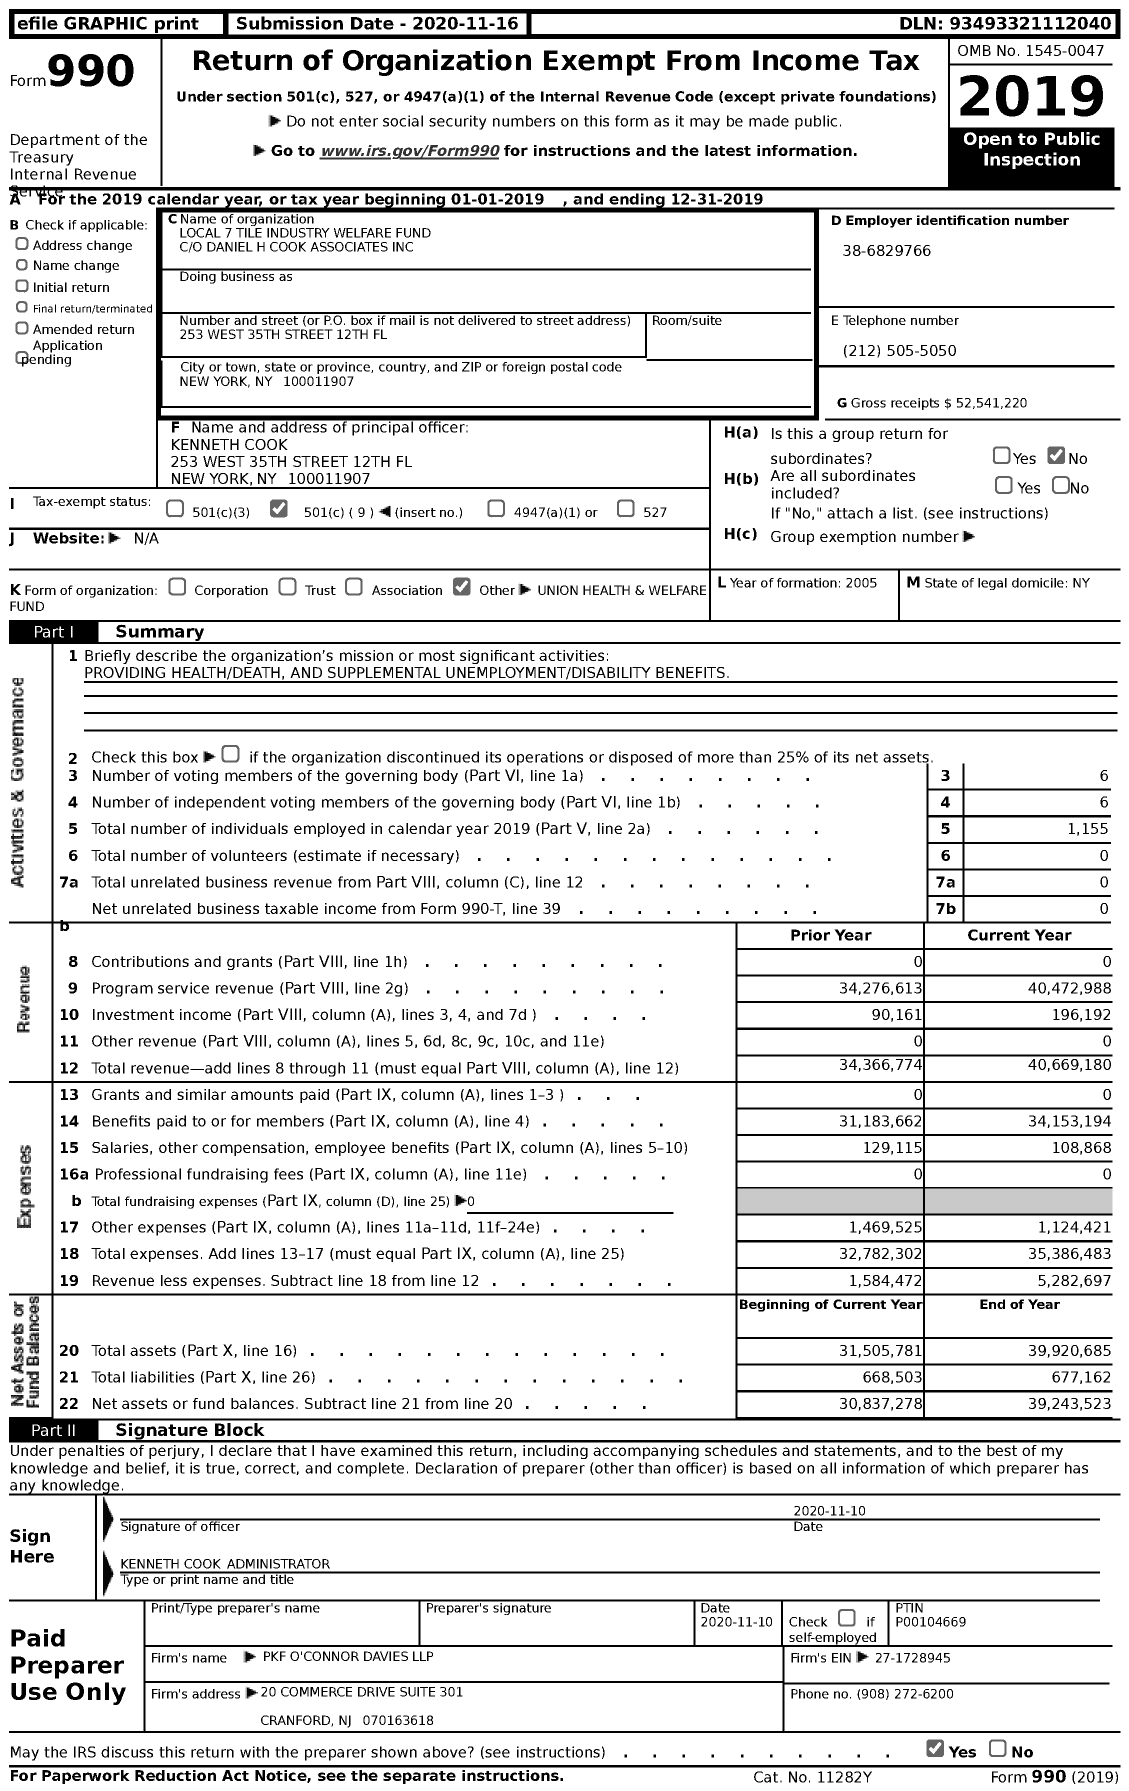 Image of first page of 2019 Form 990 for Local 7 Tile Industry Welfare Fund